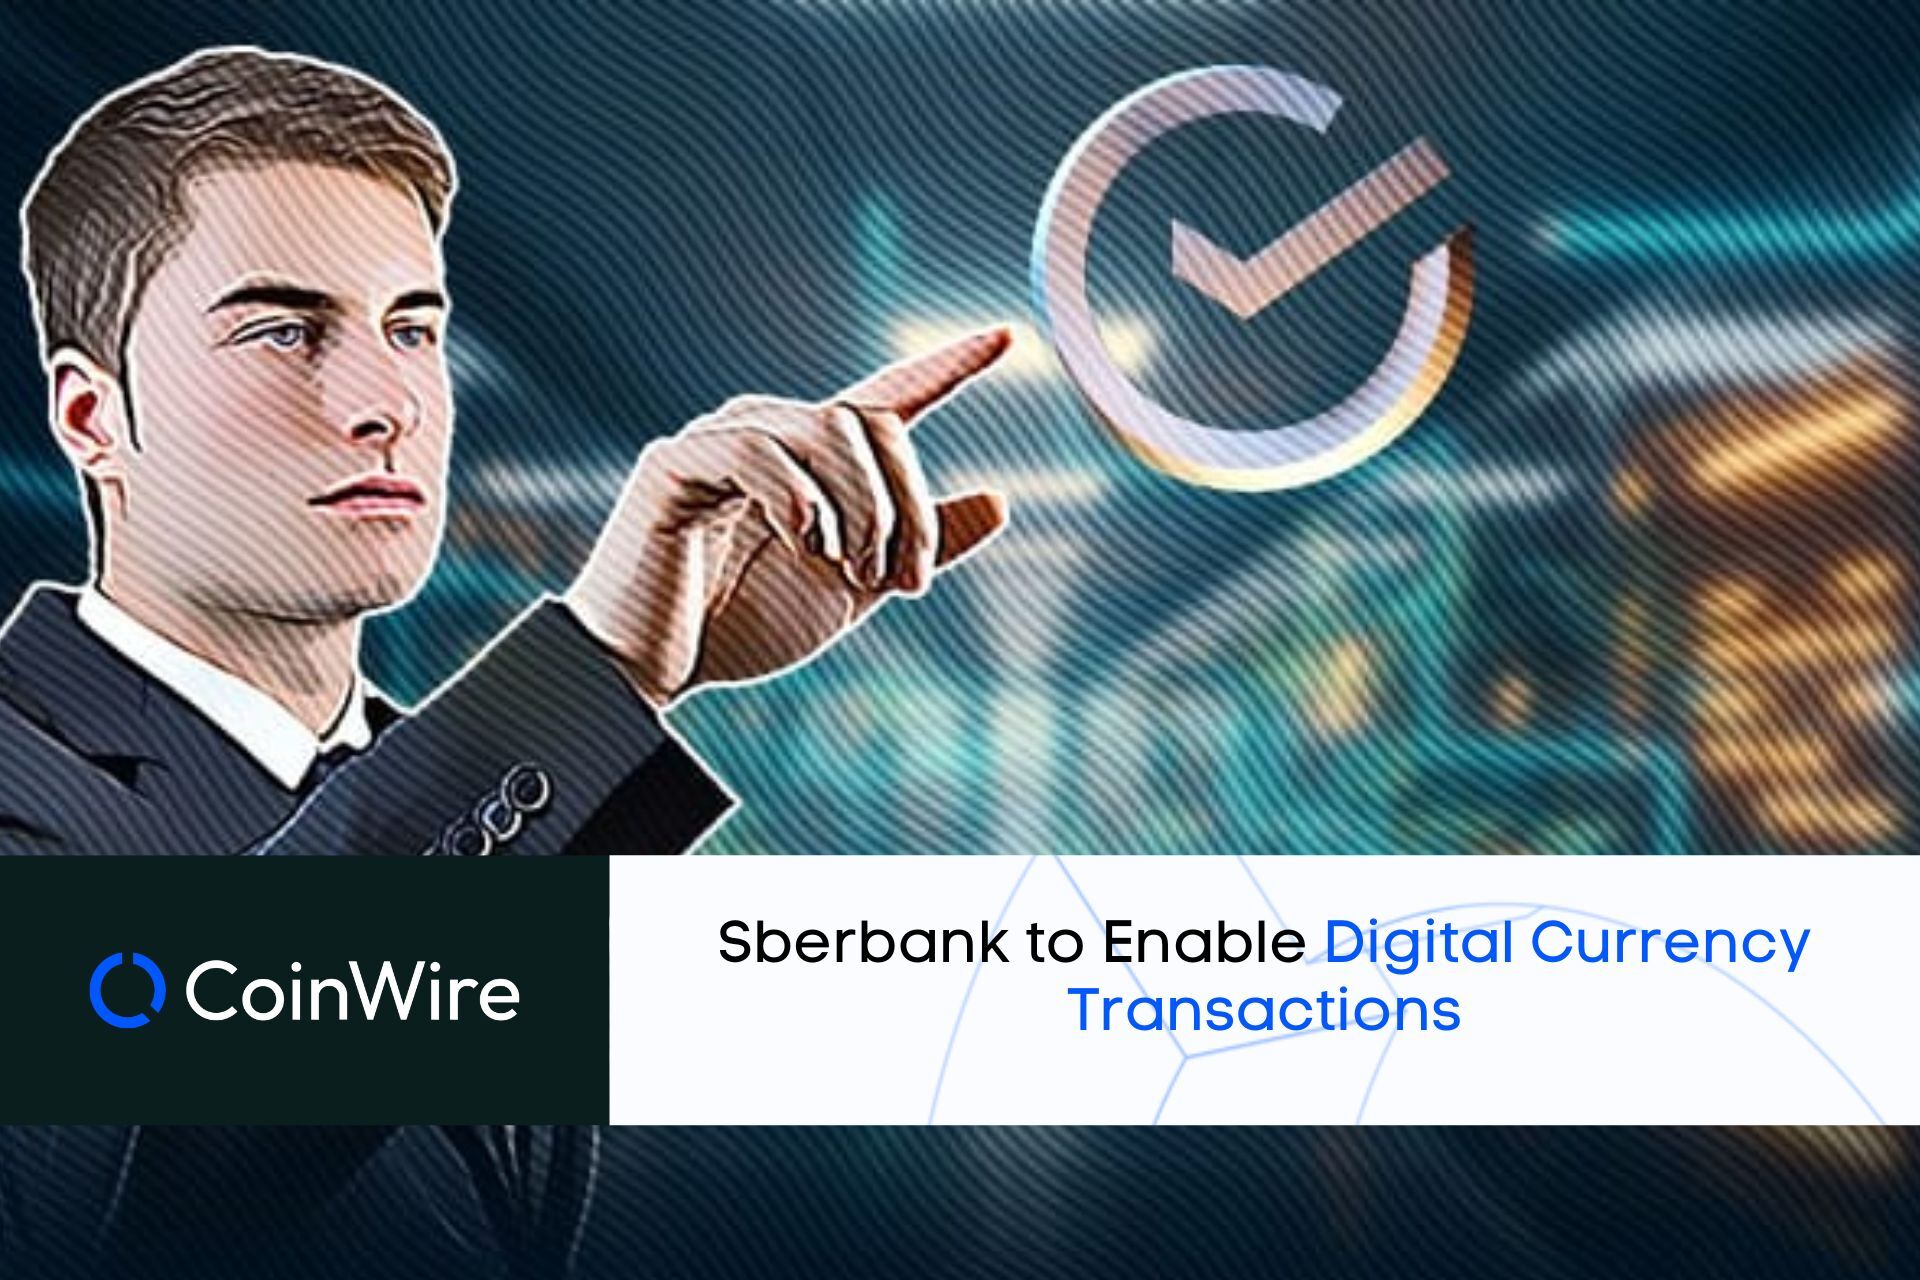 Sberbank To Enable Digital Currency Transactions